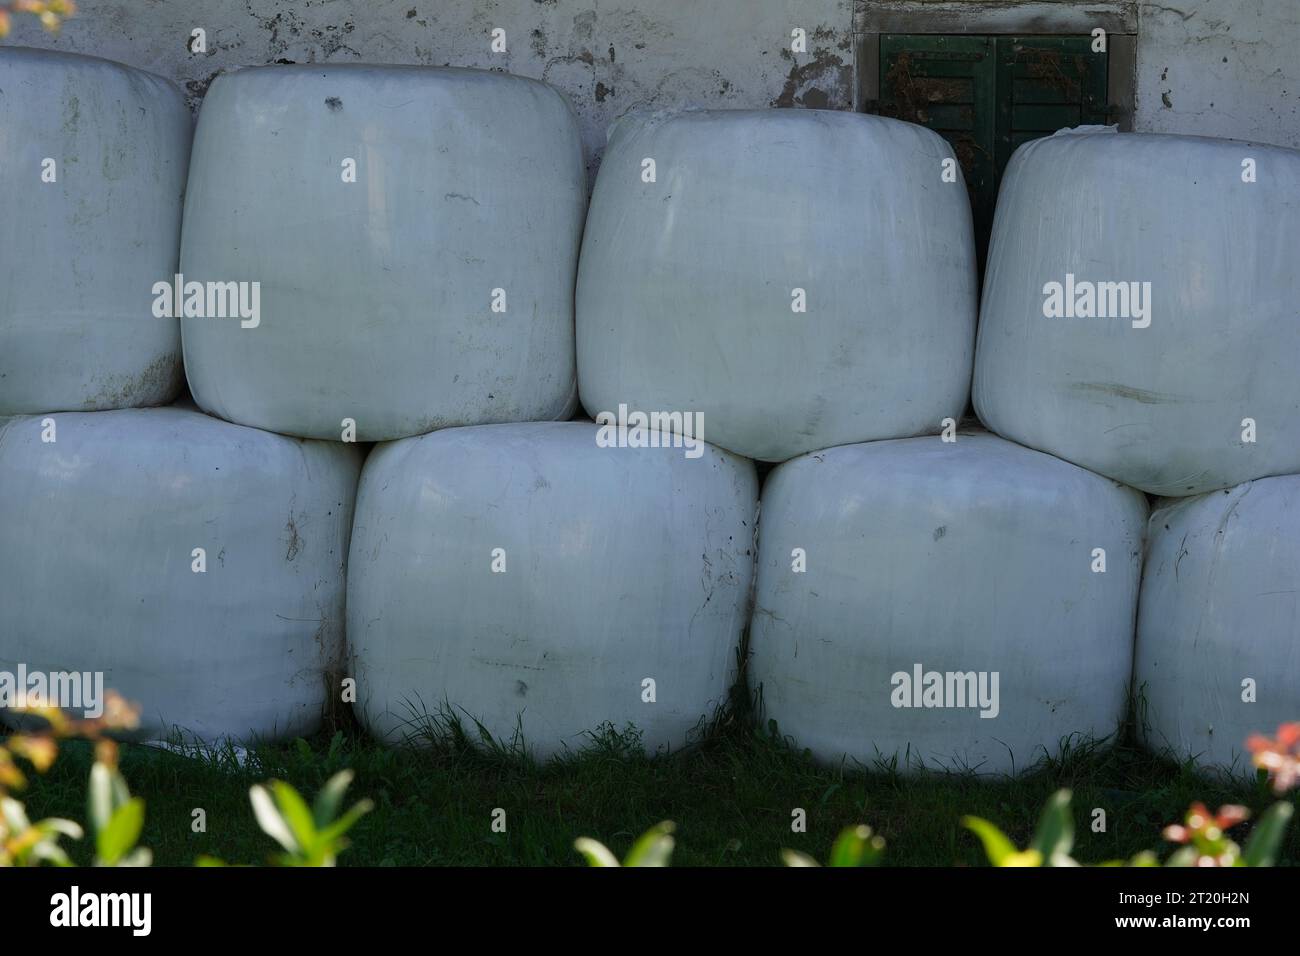 Cattle hay pressed into cylindrical bales and wrapped in plastic film. The bales are stacked in two rows. Stock Photo